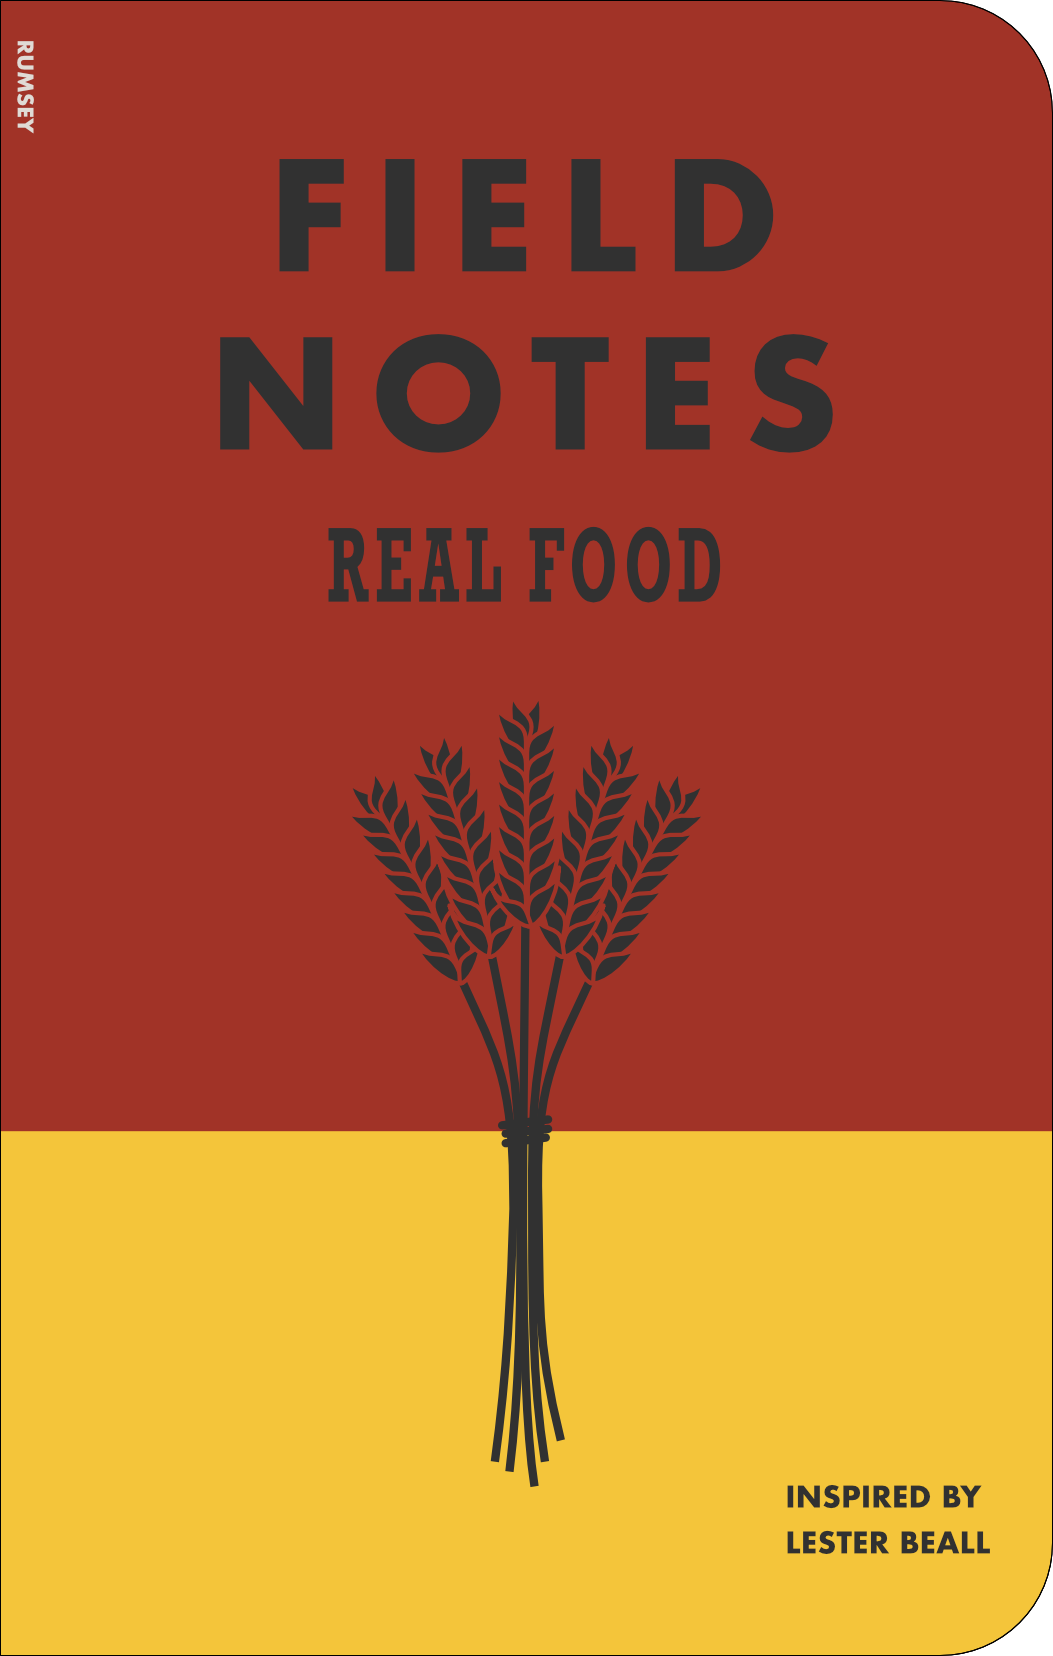 Field Notes designs based on the work of Lester Bell